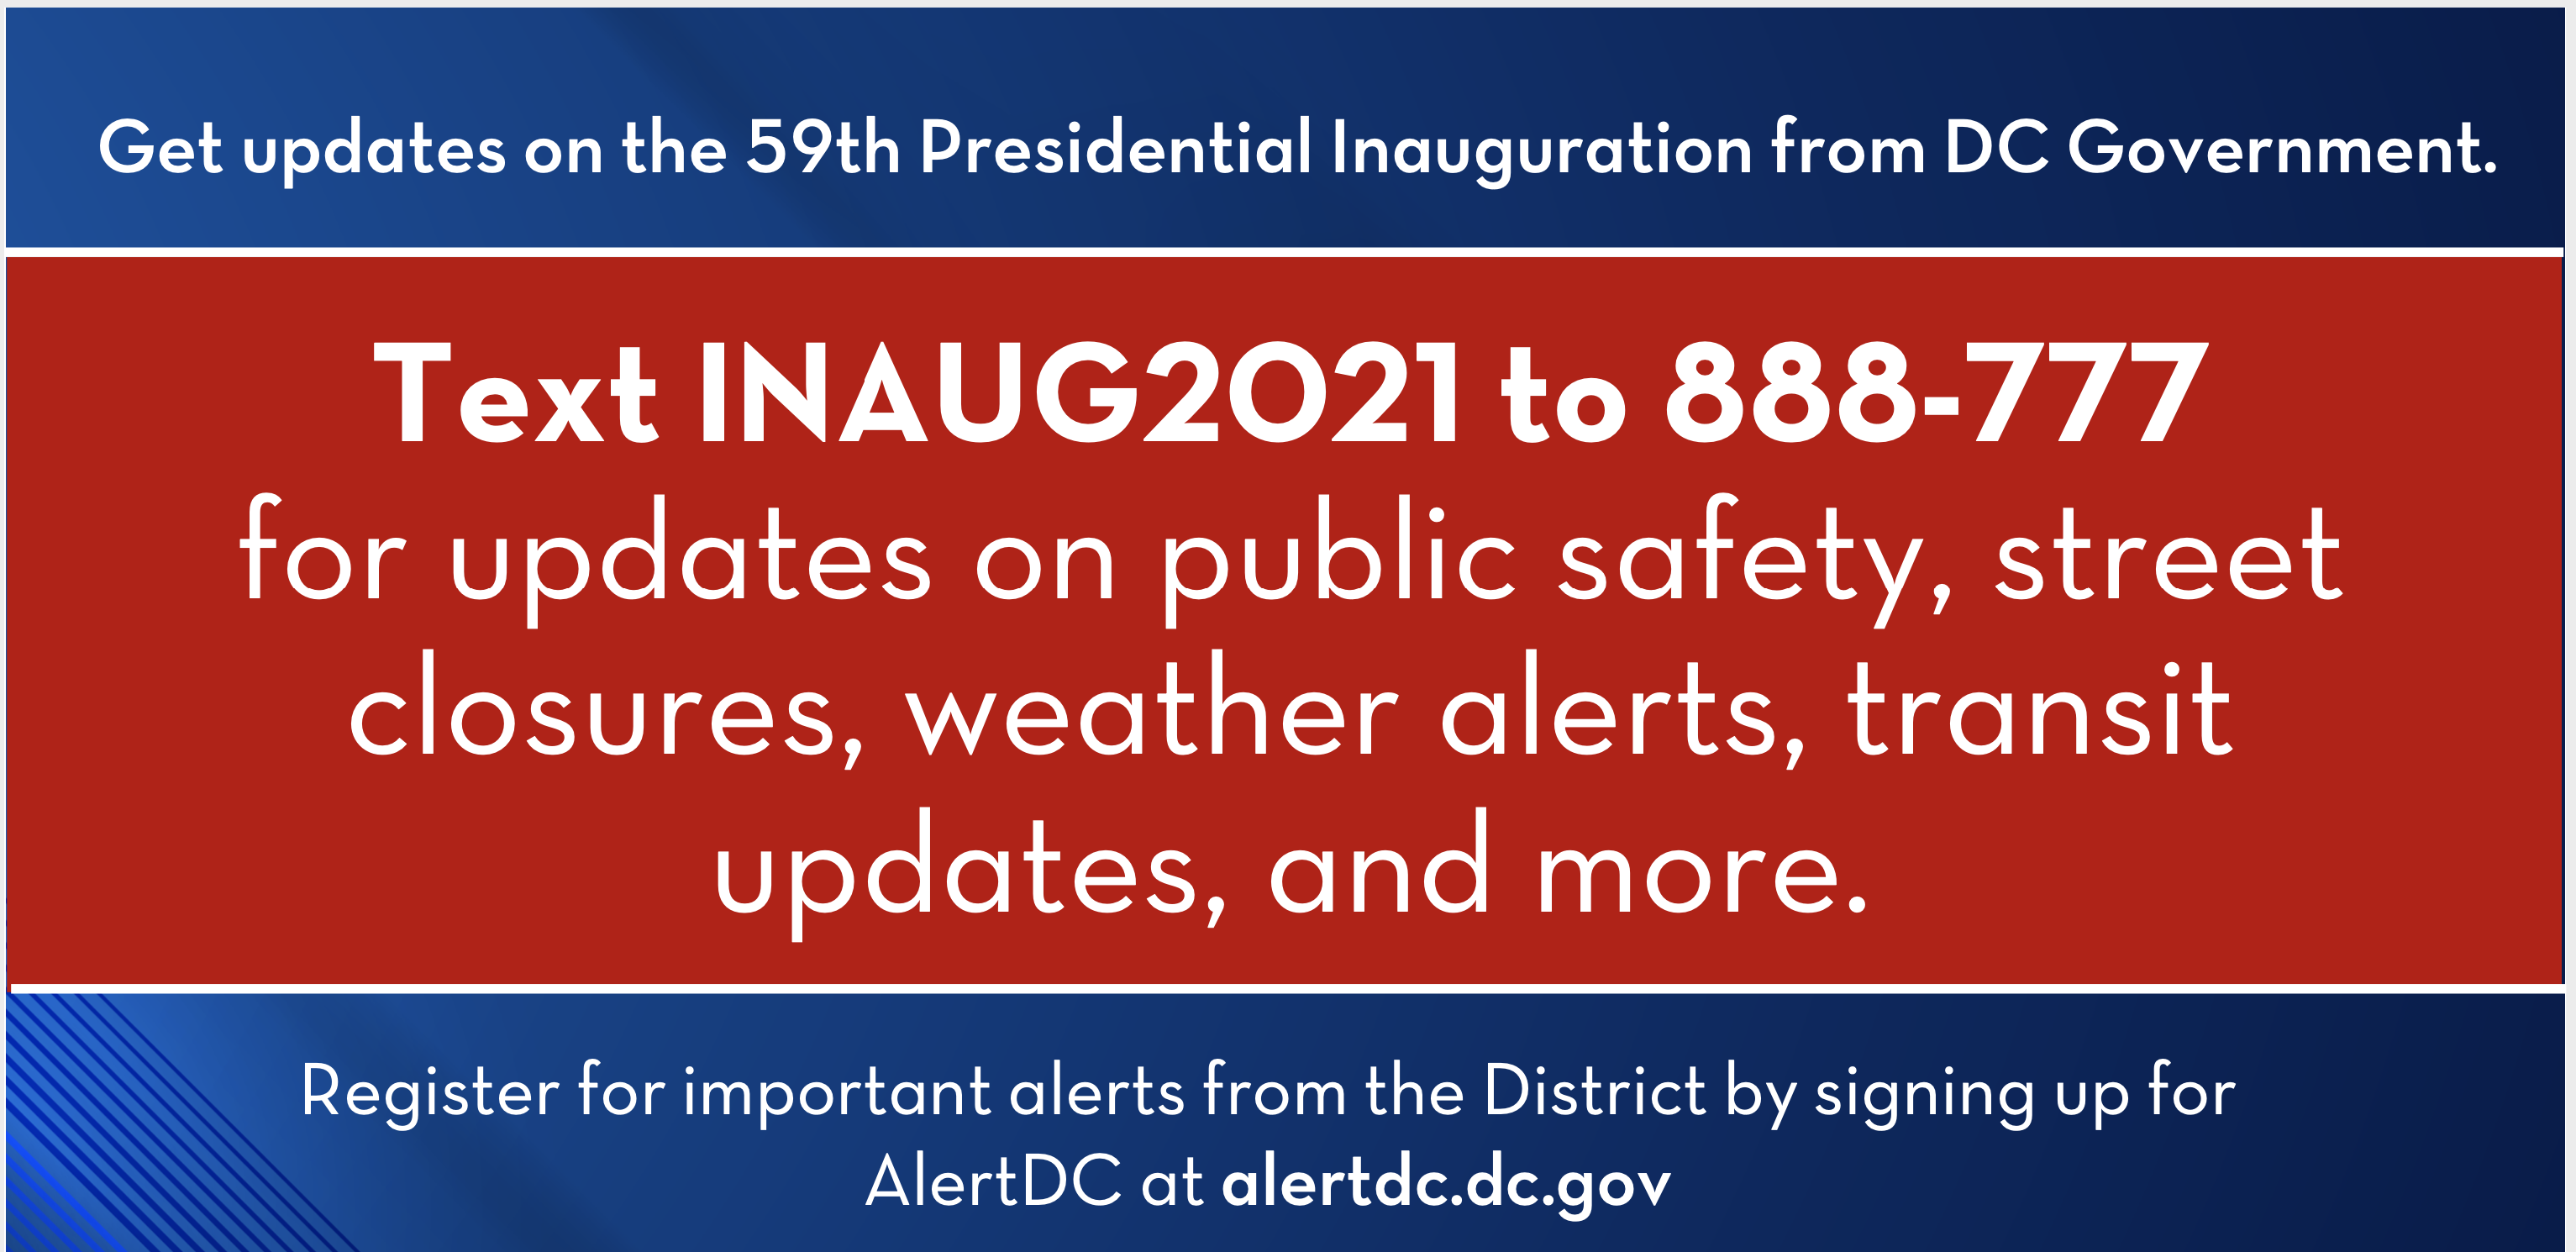 Text INAUG2021 to 888-777 for text alerts